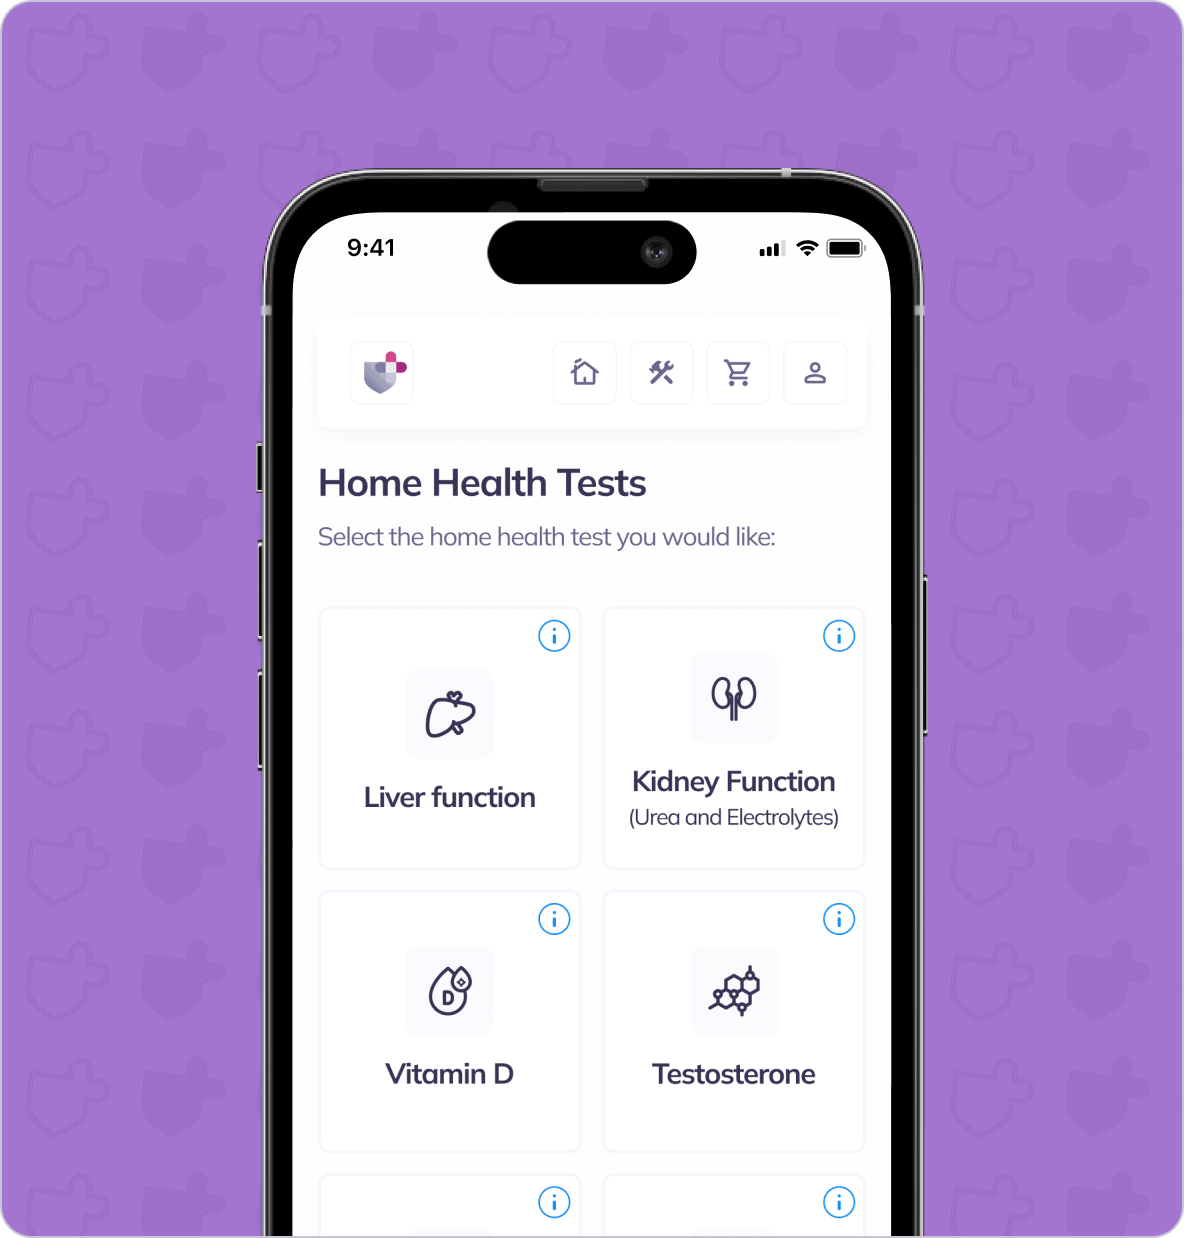 A smartphone screen displaying options for home health tests, including liver function, kidney function, vitamin D, and testosterone, against a purple patterned background.